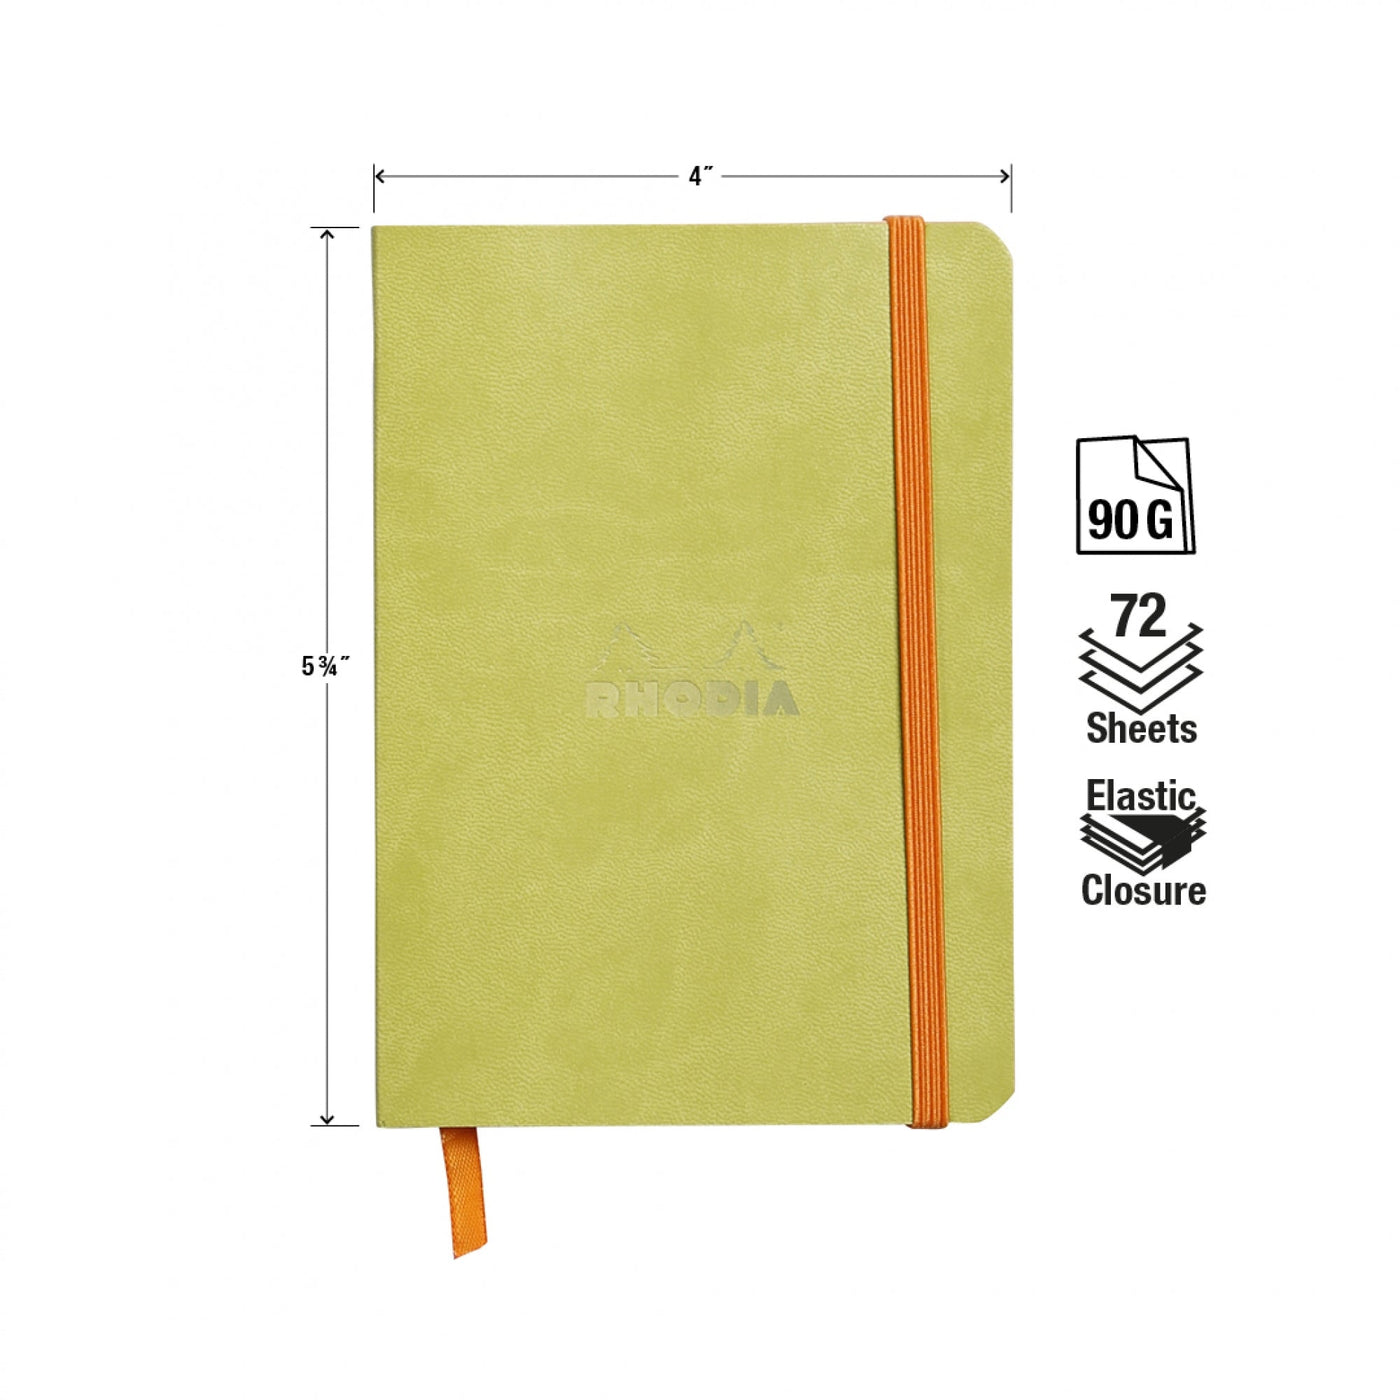 Rhodia Rhodiarama Soft Cover A6 Anise Lined Notebook Measurements